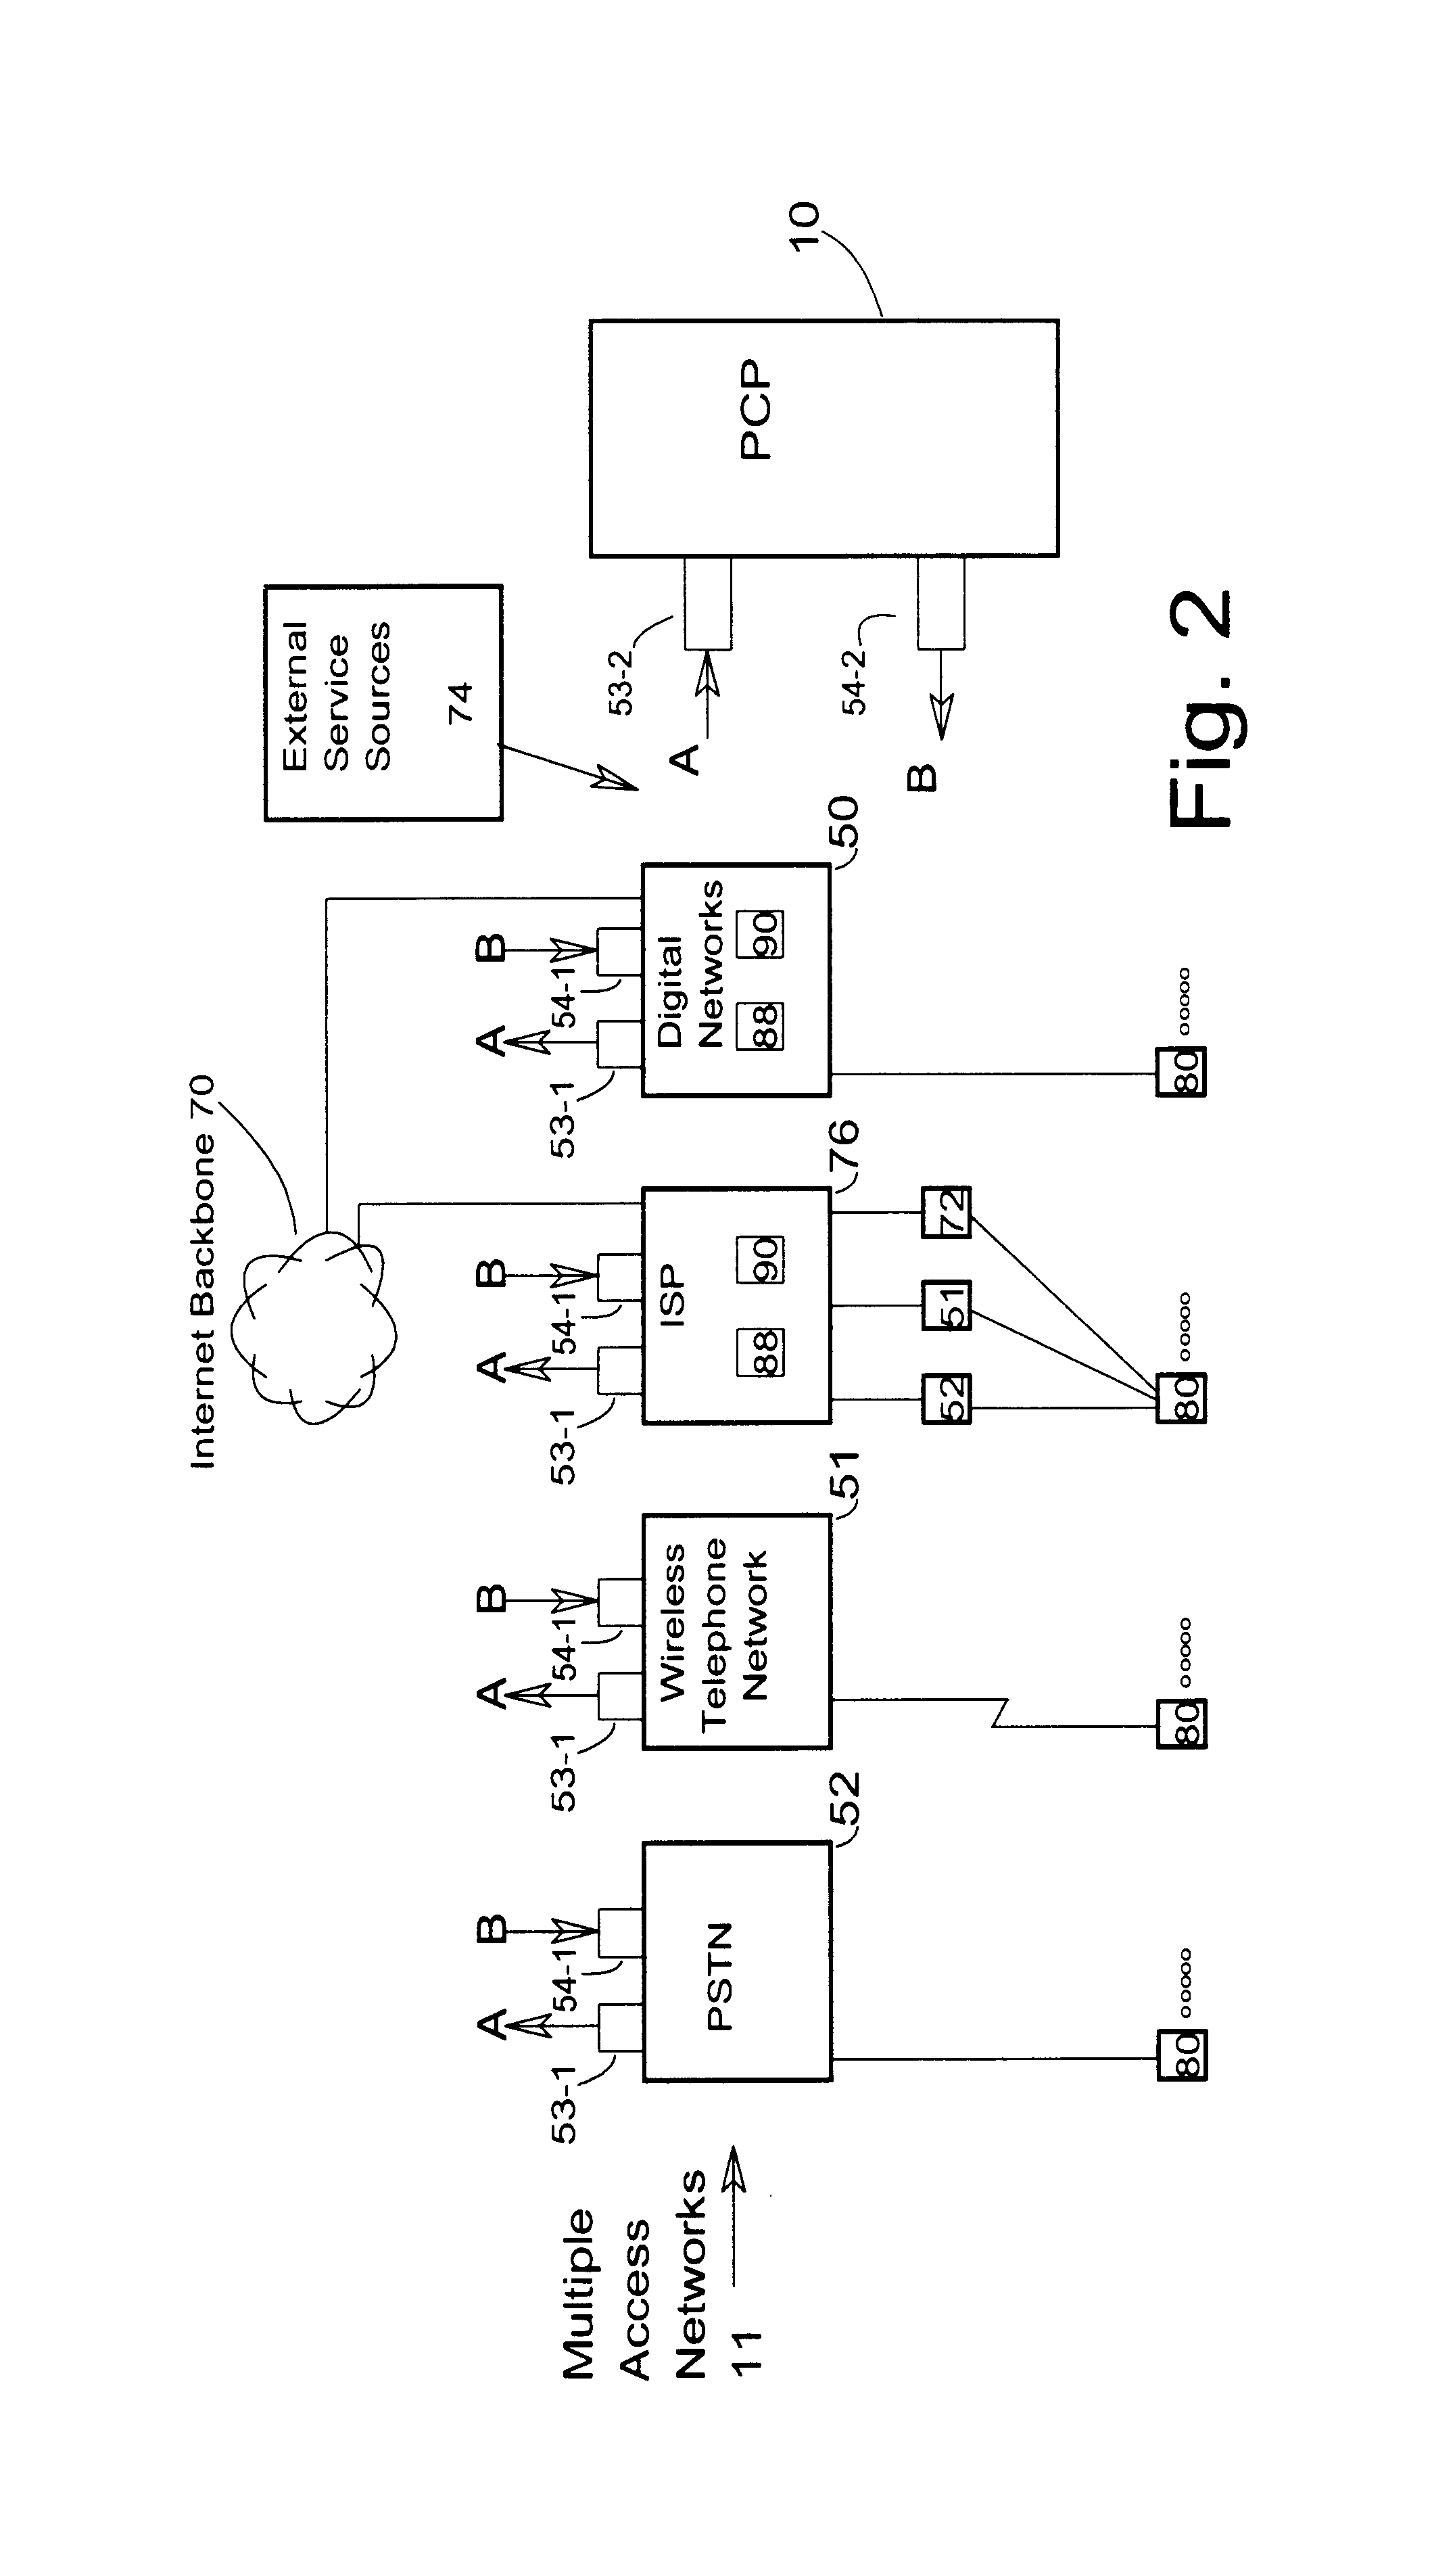 Independent contact spanning multiple access networks